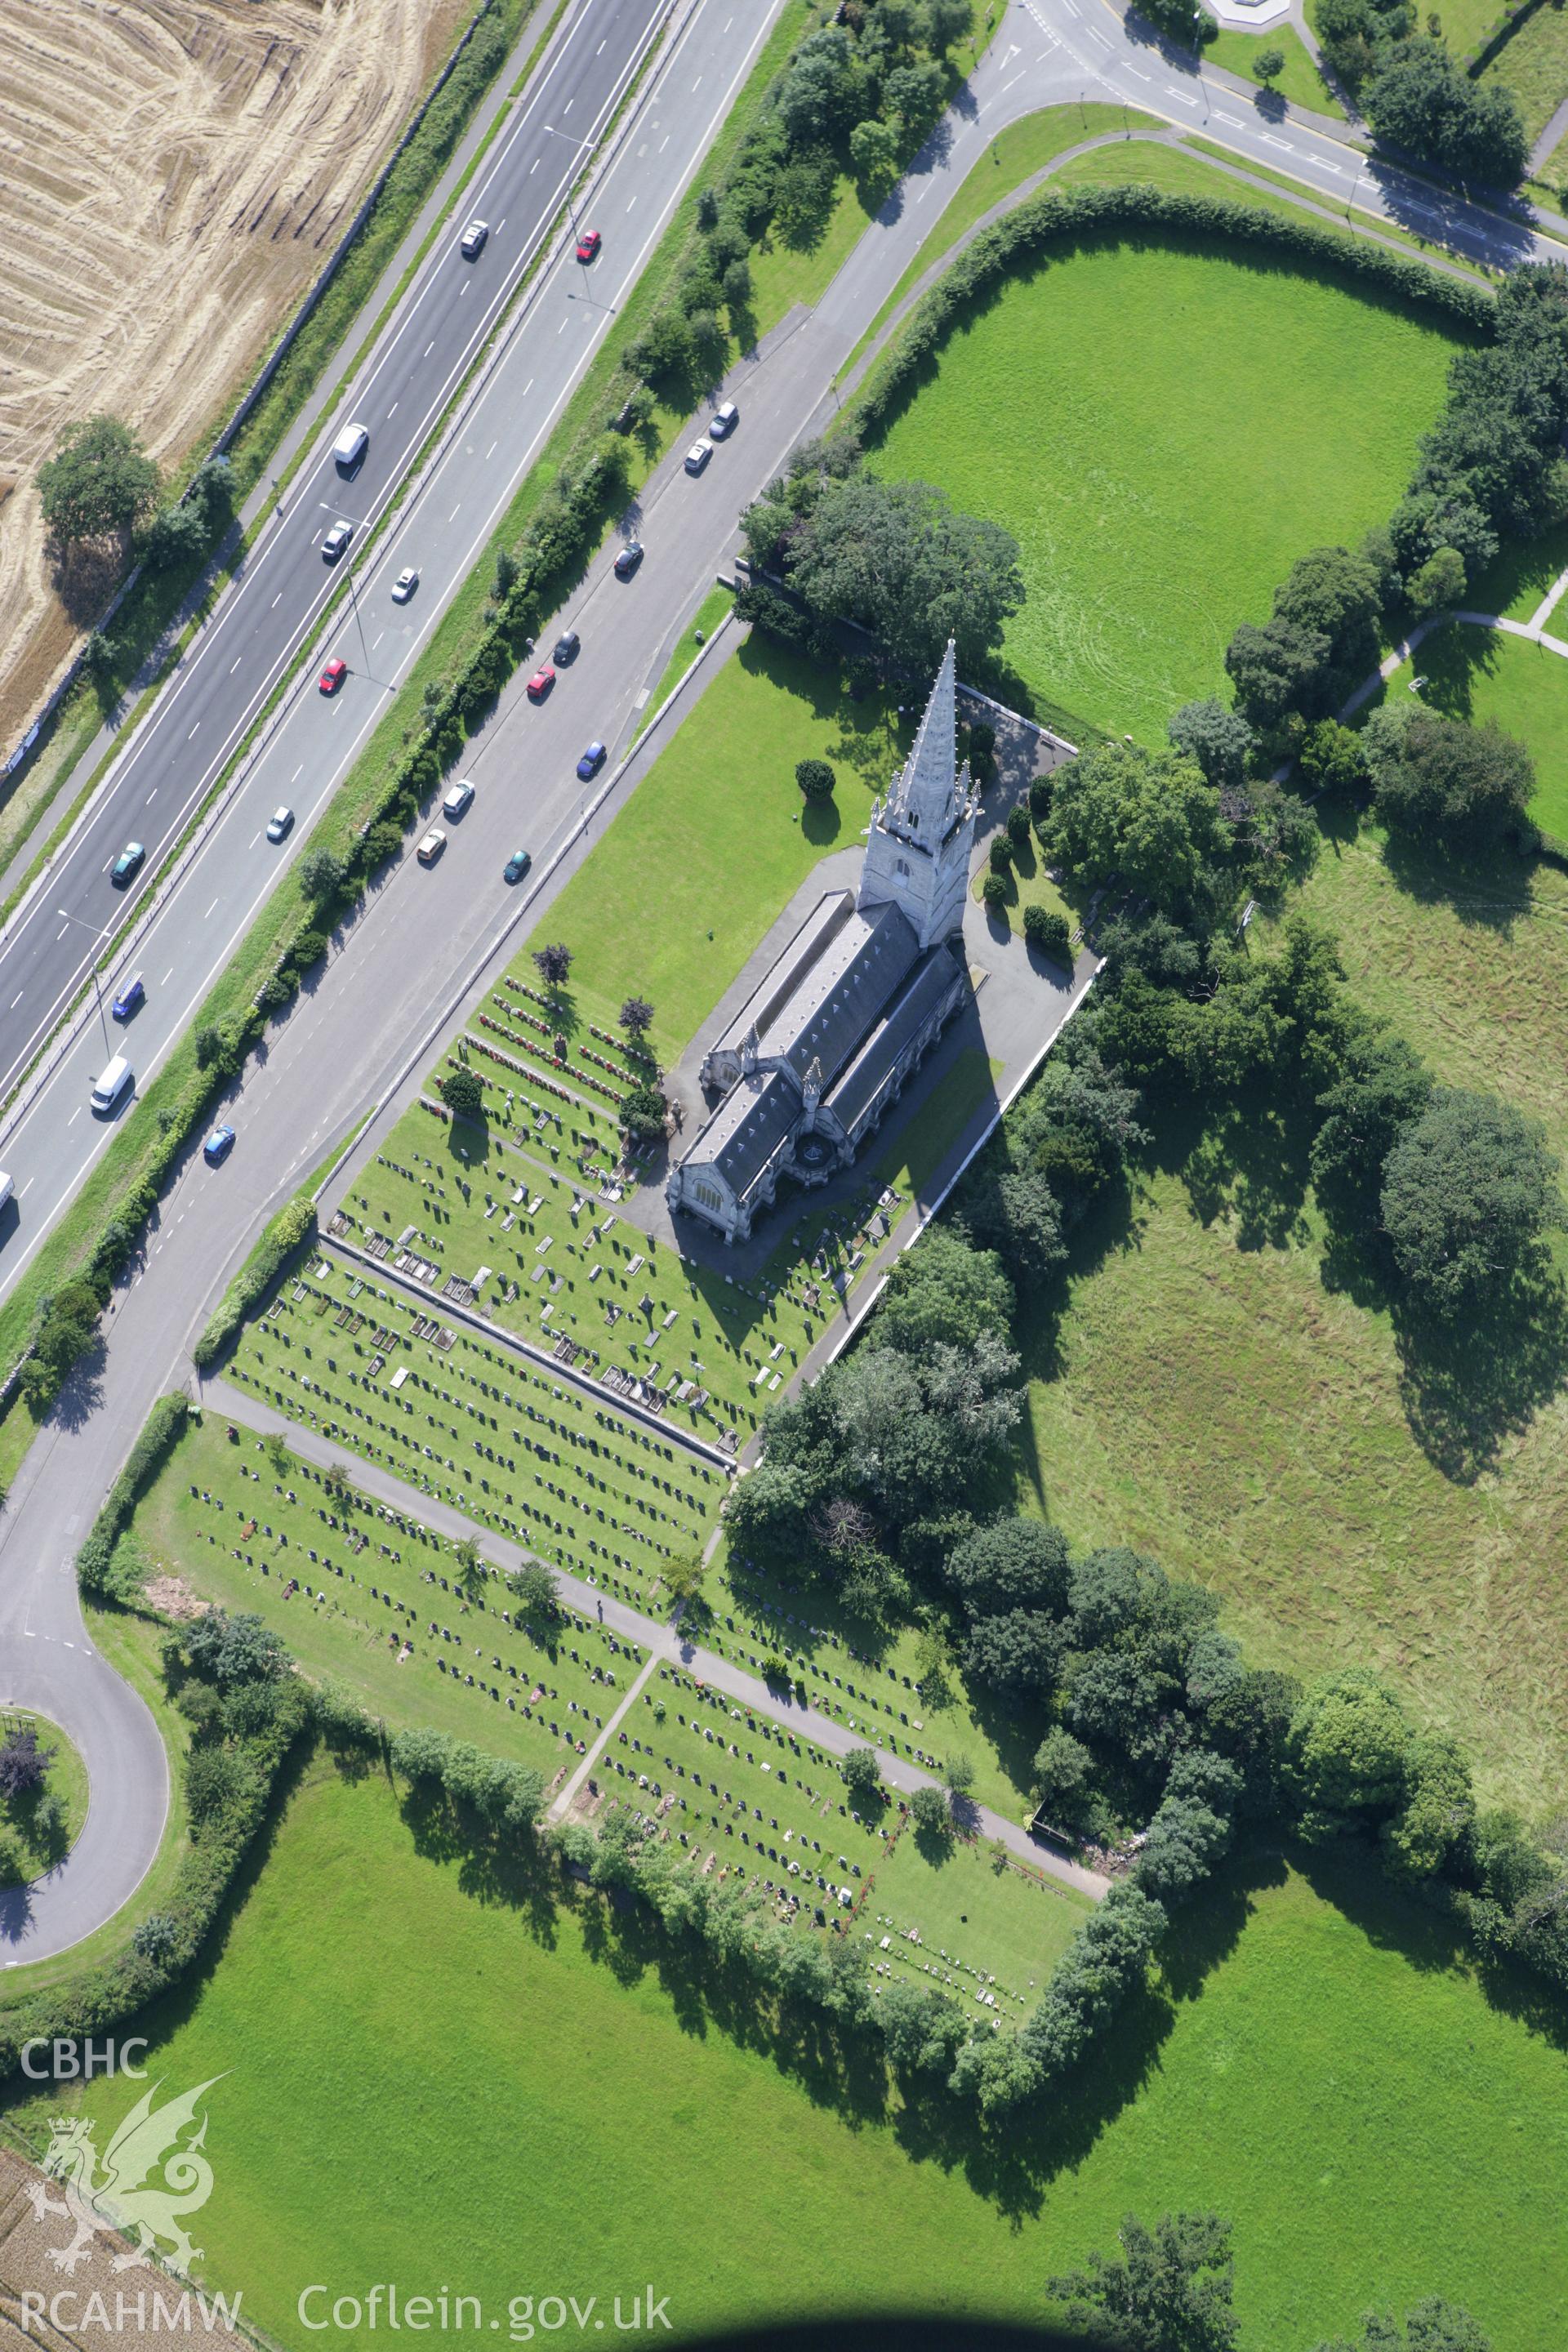 RCAHMW colour oblique aerial photograph of St Margaret's Church (The Marble Church), Bodelwyddan. Taken on 31 July 2007 by Toby Driver